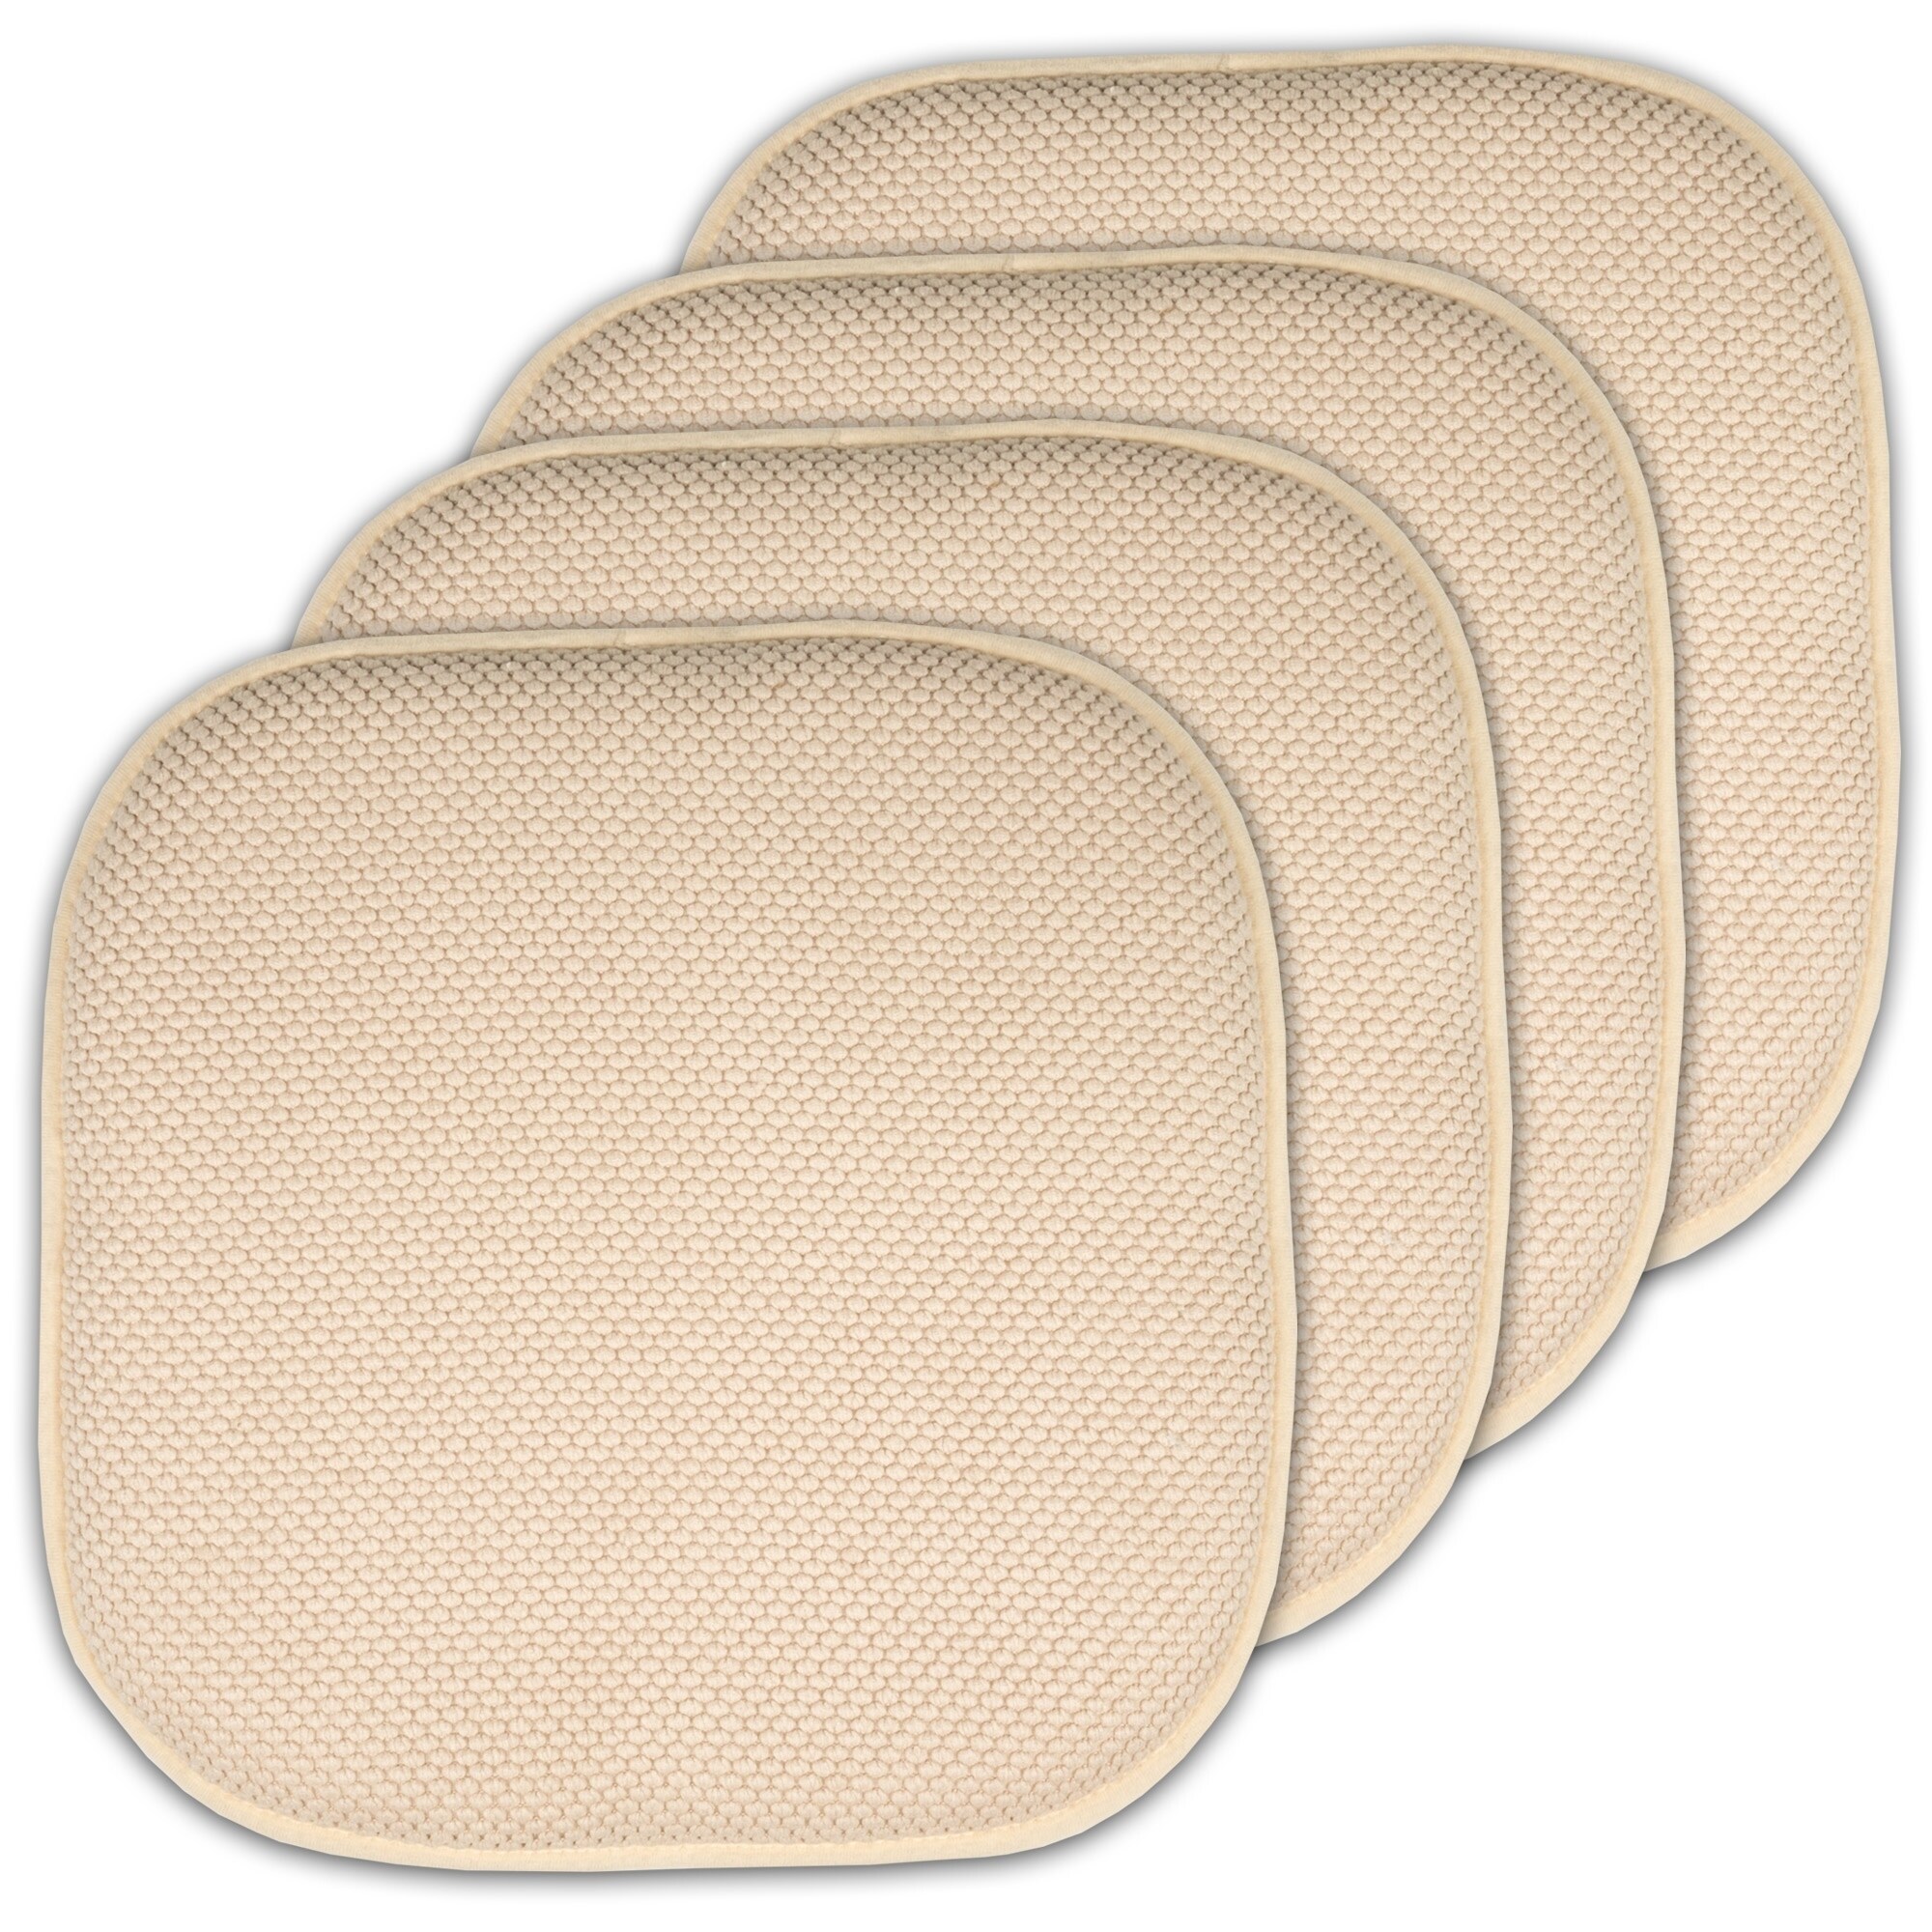 Black 16-inch Memory Foam Chair Pad/Seat Cushion with Non-Slip Backing (2  or 4 Pack) - On Sale - Bed Bath & Beyond - 10858136